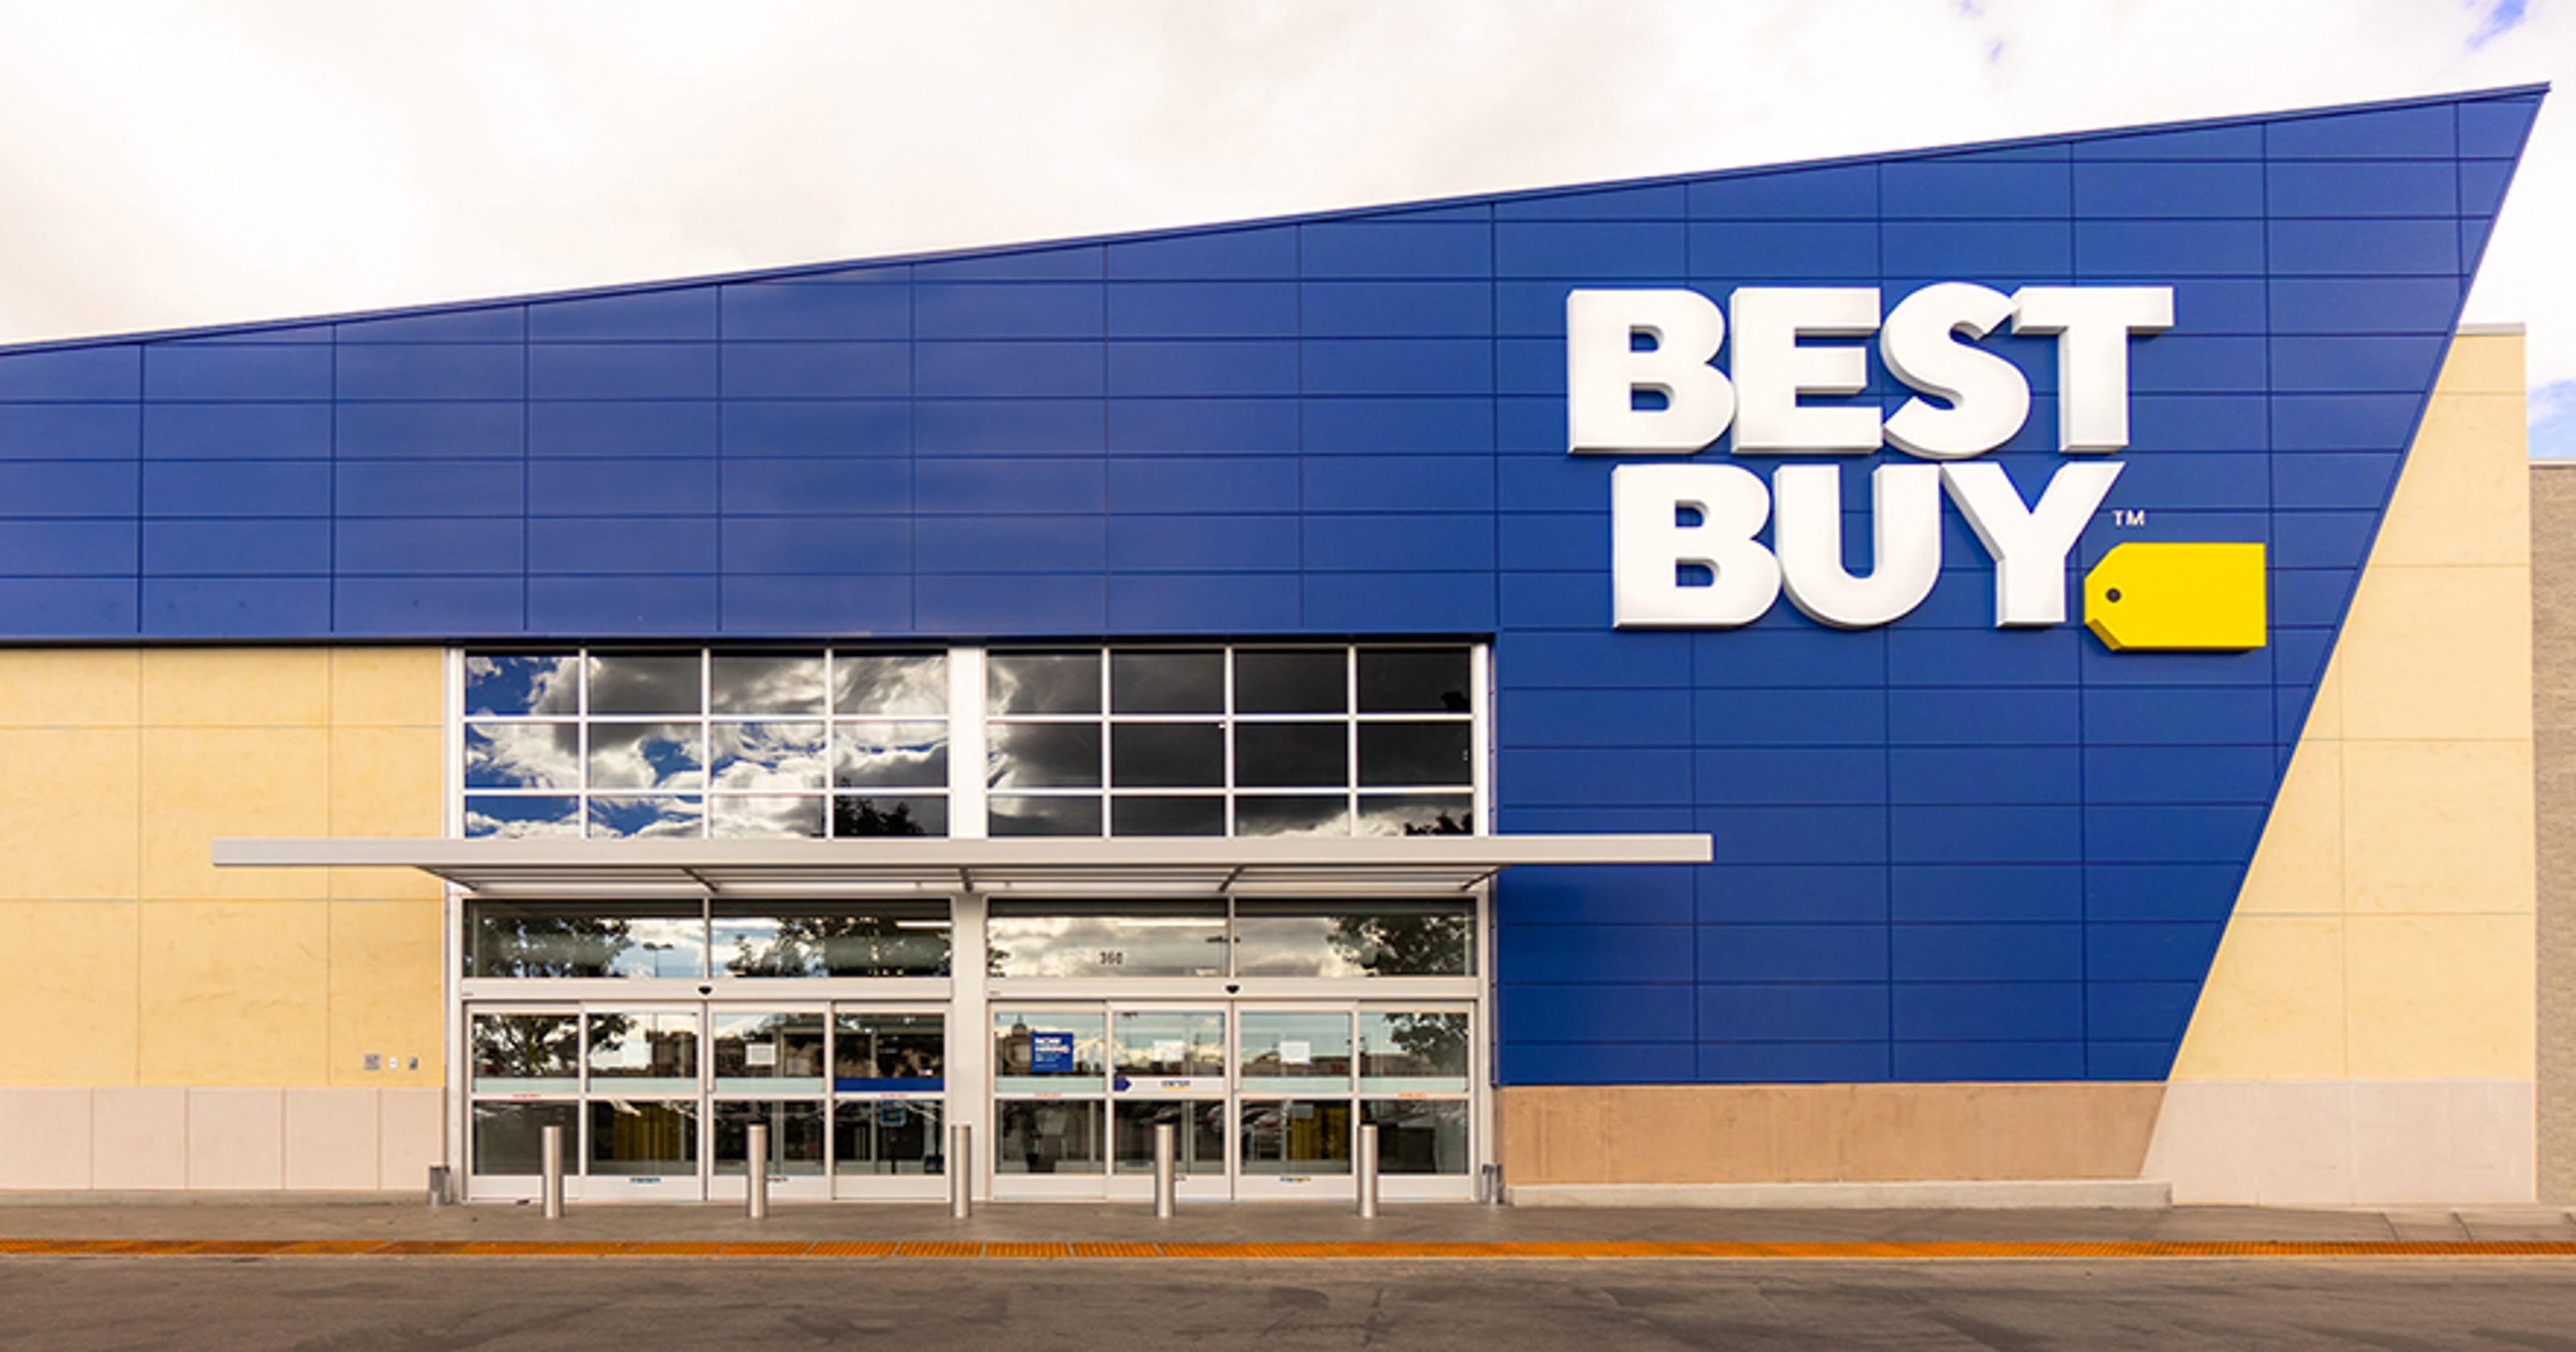 Black Friday 2018: Best Buy will have huge discounts on TVs and other electronics